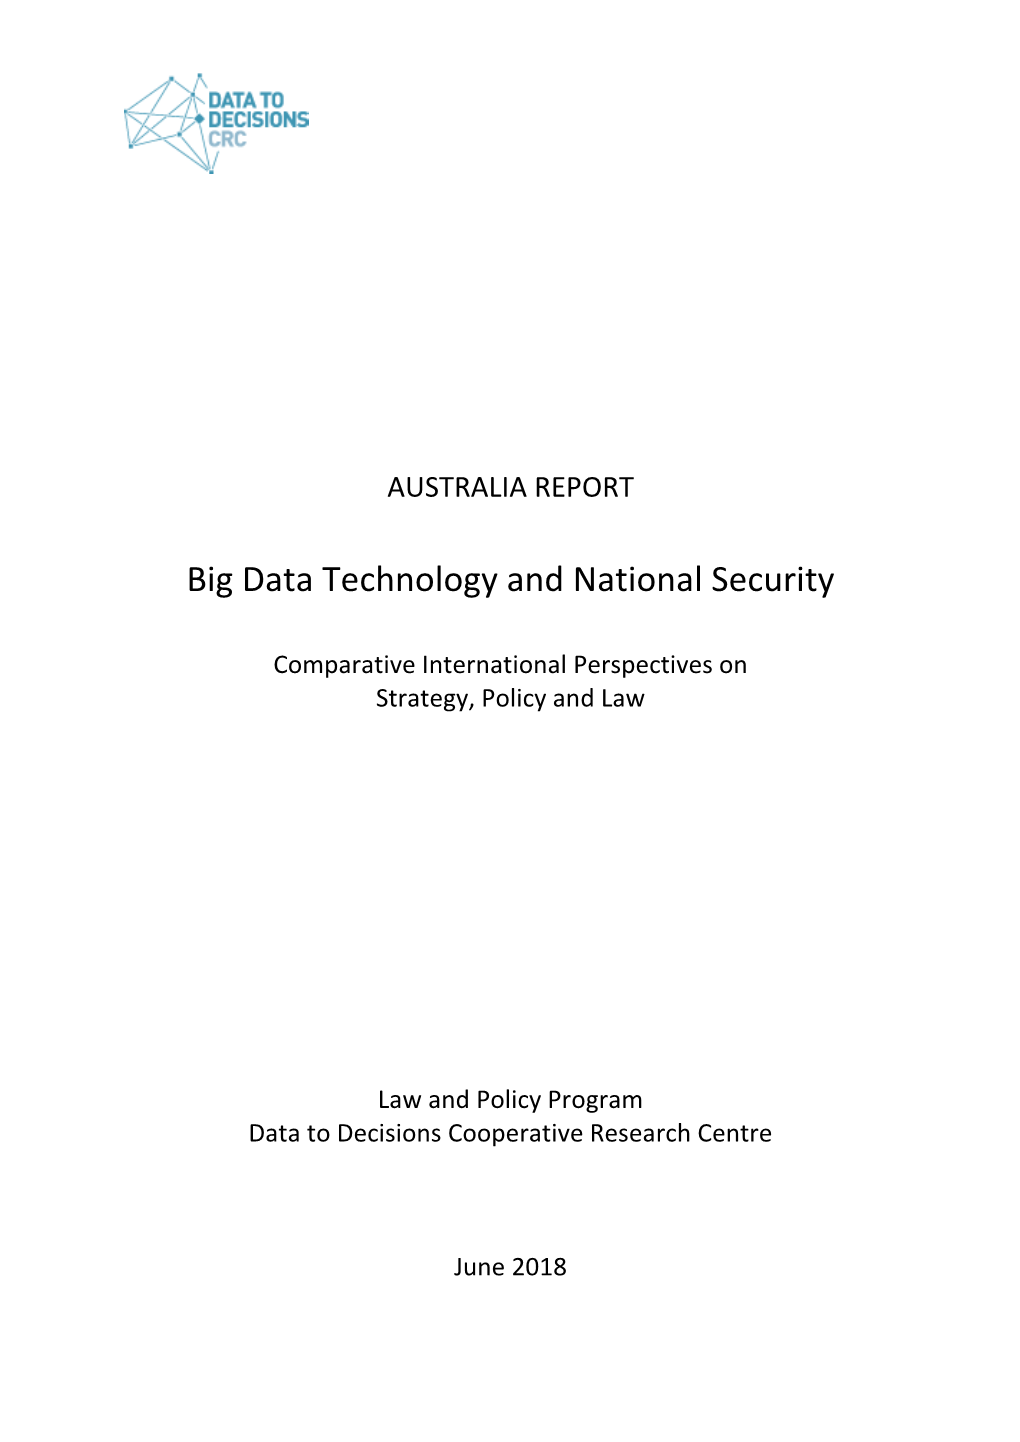 Big Data Technology and National Security, Comparative